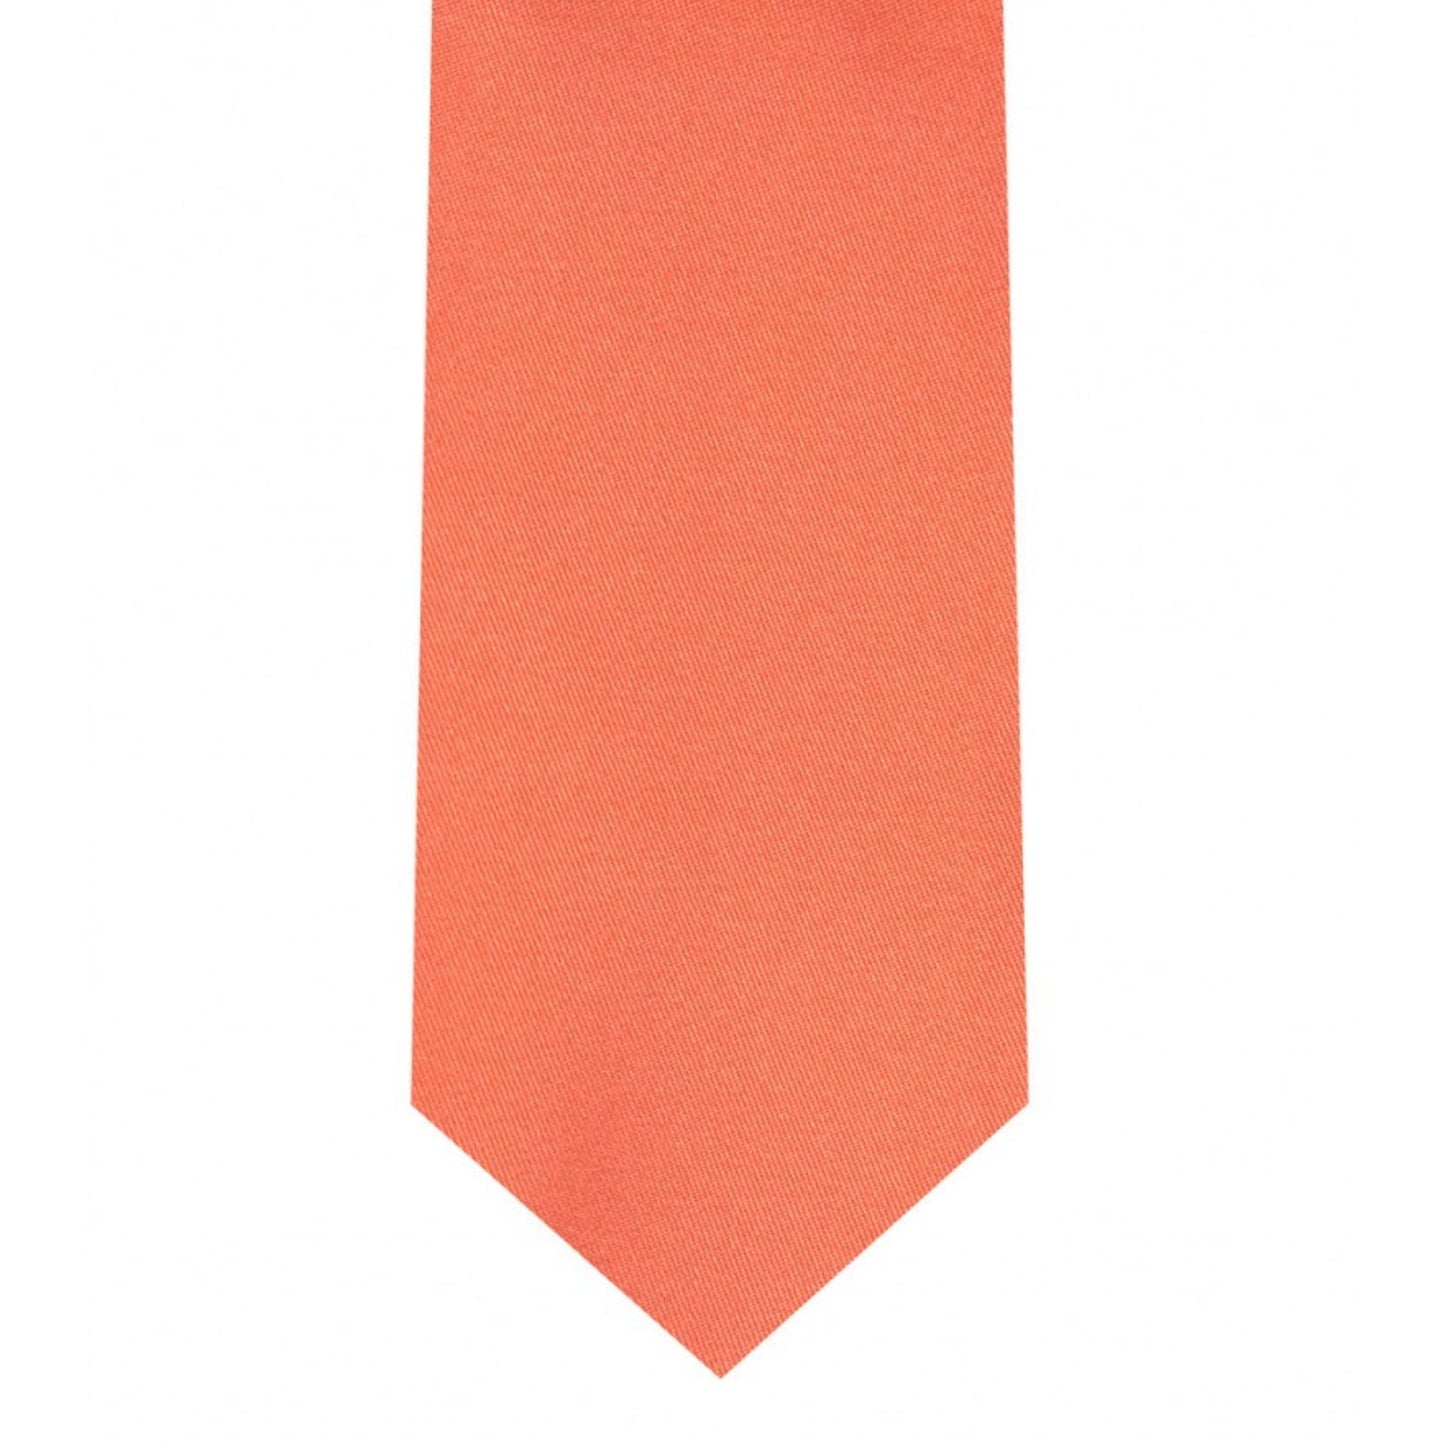 Classic Coral Tie Skinny width 2.75 inches With Matching Pocket Square | KCT Menswear